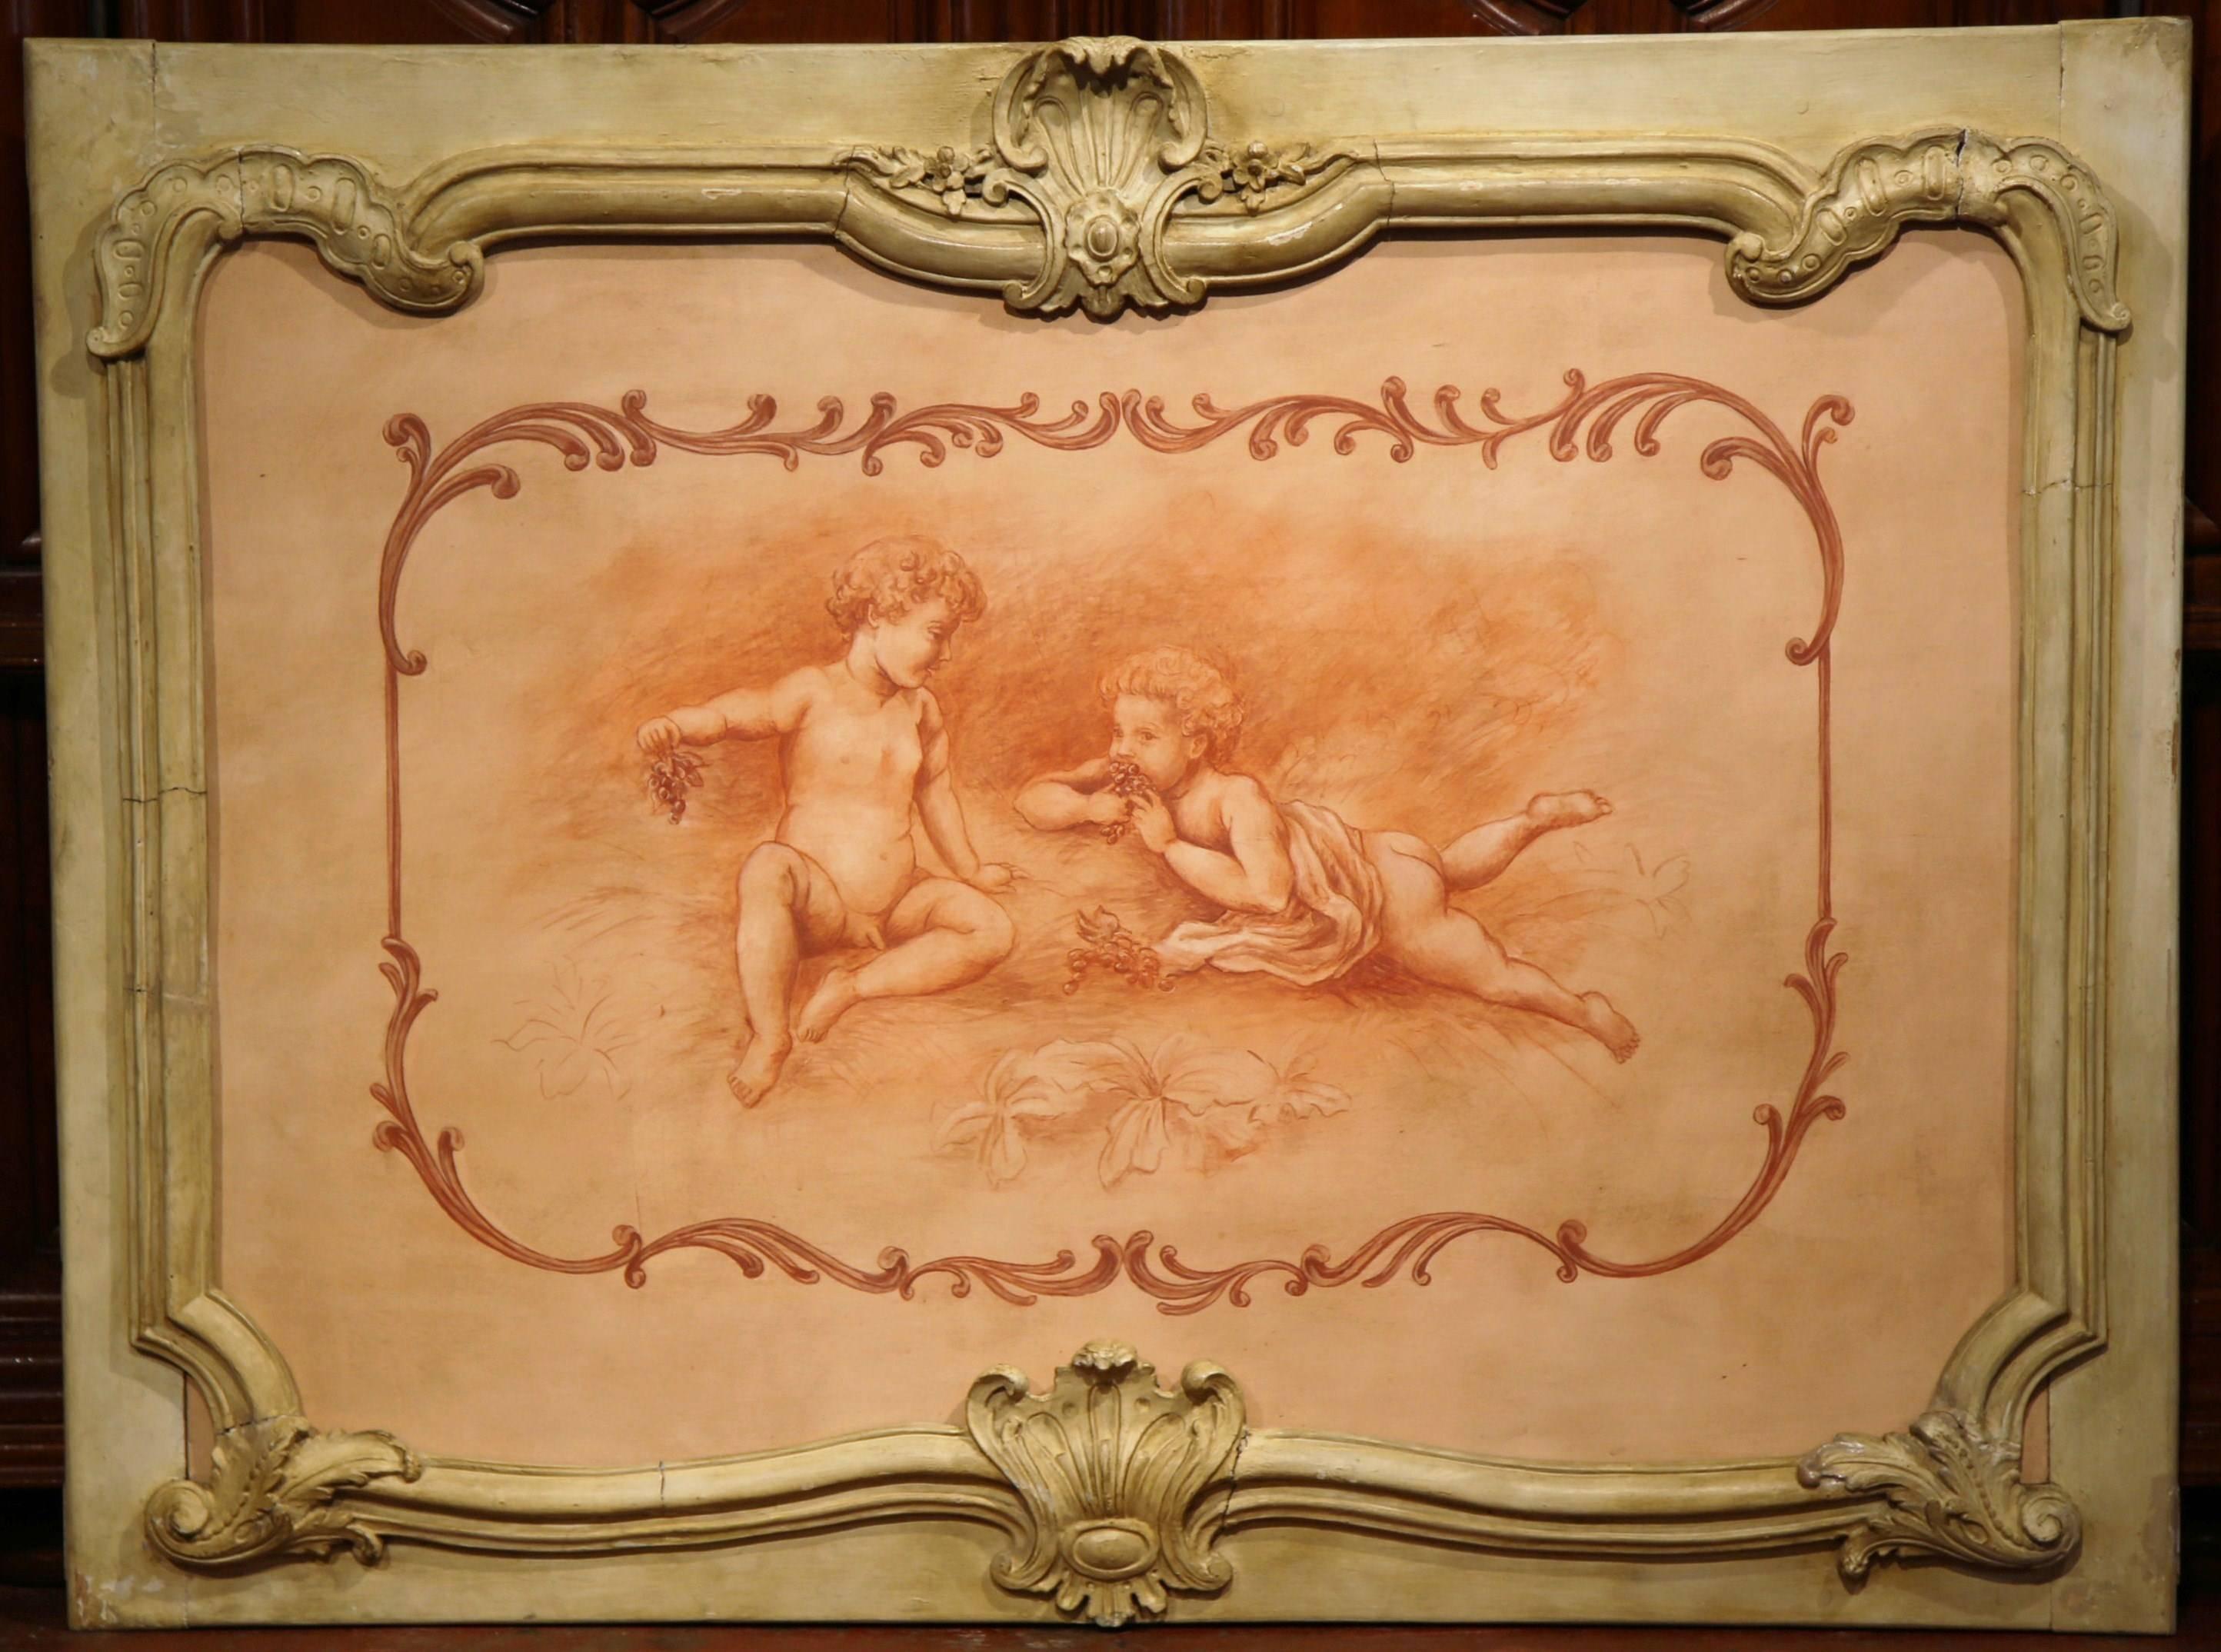 This elegant wall hanging wood panel came from a Parisian paneled room. The large painted frame was crafted in France, circa 1880, and depicts two cherubs at play eating grapes; the traditional, figural piece has wonderful hand-carved scrolled